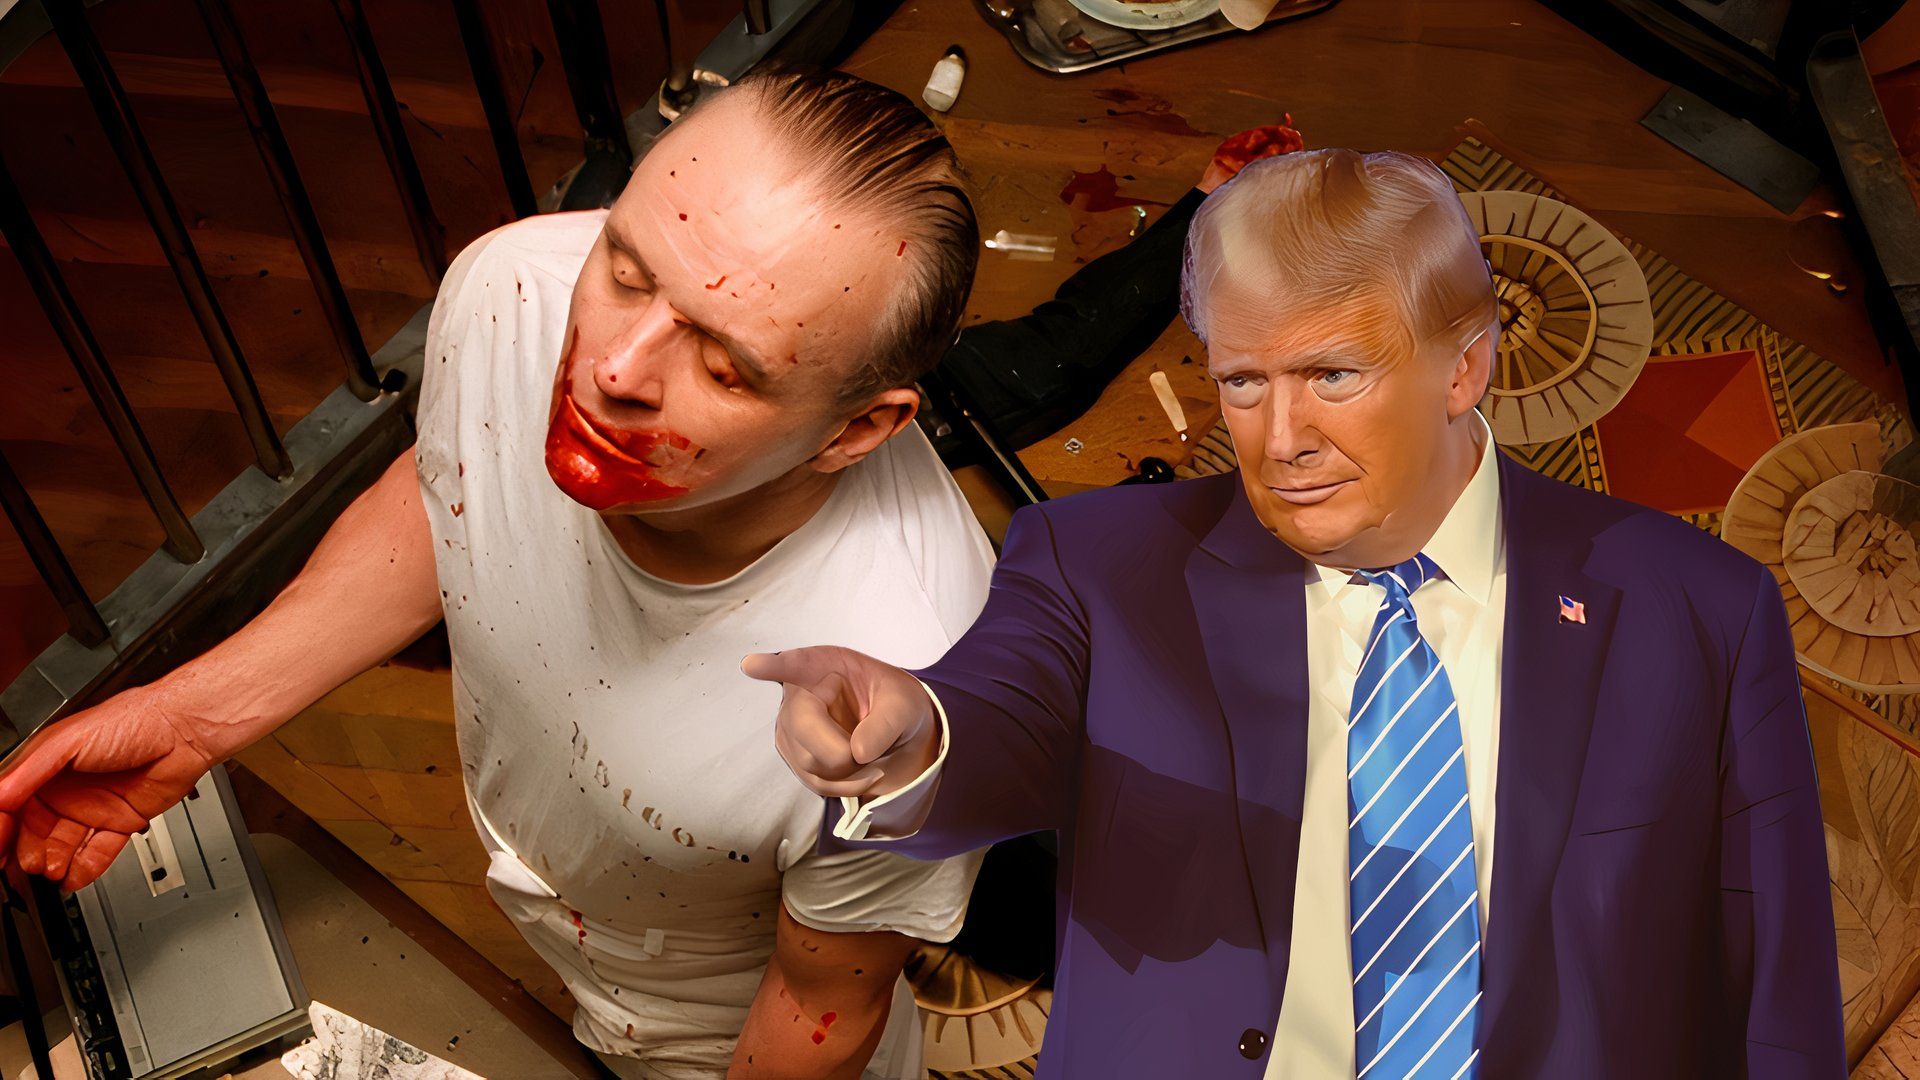 Anthony Hopkins as a bloody Hannibal Lecter in Silence of the Lambs next to Donald Trump pointing at him